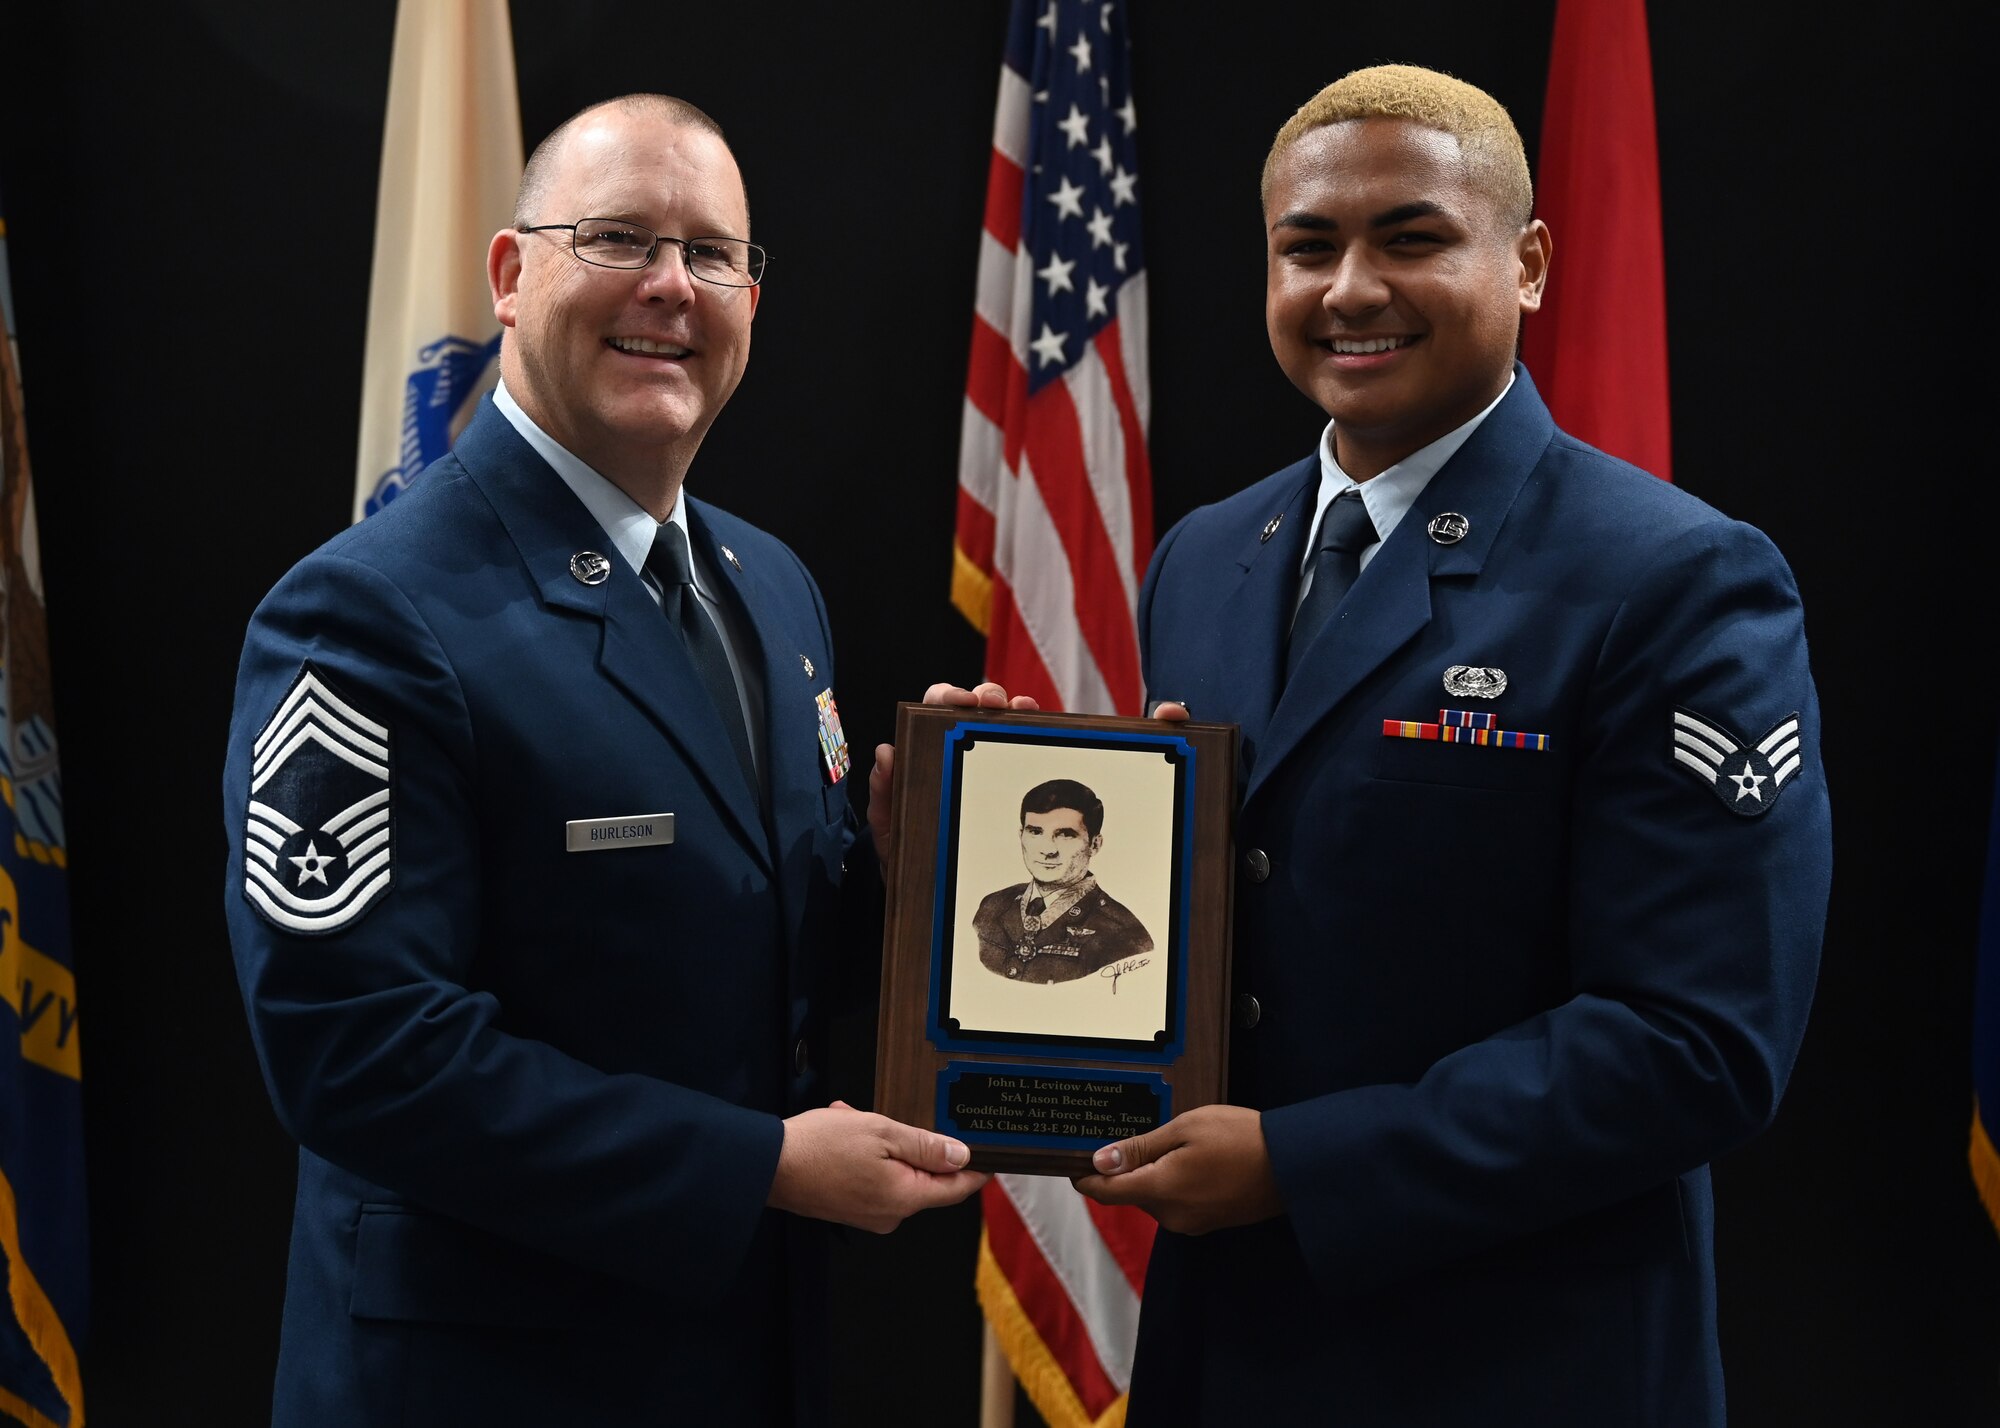 U.S. Air Force Chief Master Sgt. Anthony Burleson, 47th Mission Support Group superintendent, presents the John L. Levitow Award to Senior Airman Jason Beecher, Class 23-E Airman Leadership School graduate, at the Class 23-E ALS graduation in the Powell Event Center, Goodfellow Air Force Base, Texas, July 20, 2023. The John L. Levitow Award is the highest award offered at ALS; it is based upon all performance tasks, peer stratifications, and the capstone exercise. (U.S. Air Force photo by Senior Airman Ethan Sherwood)